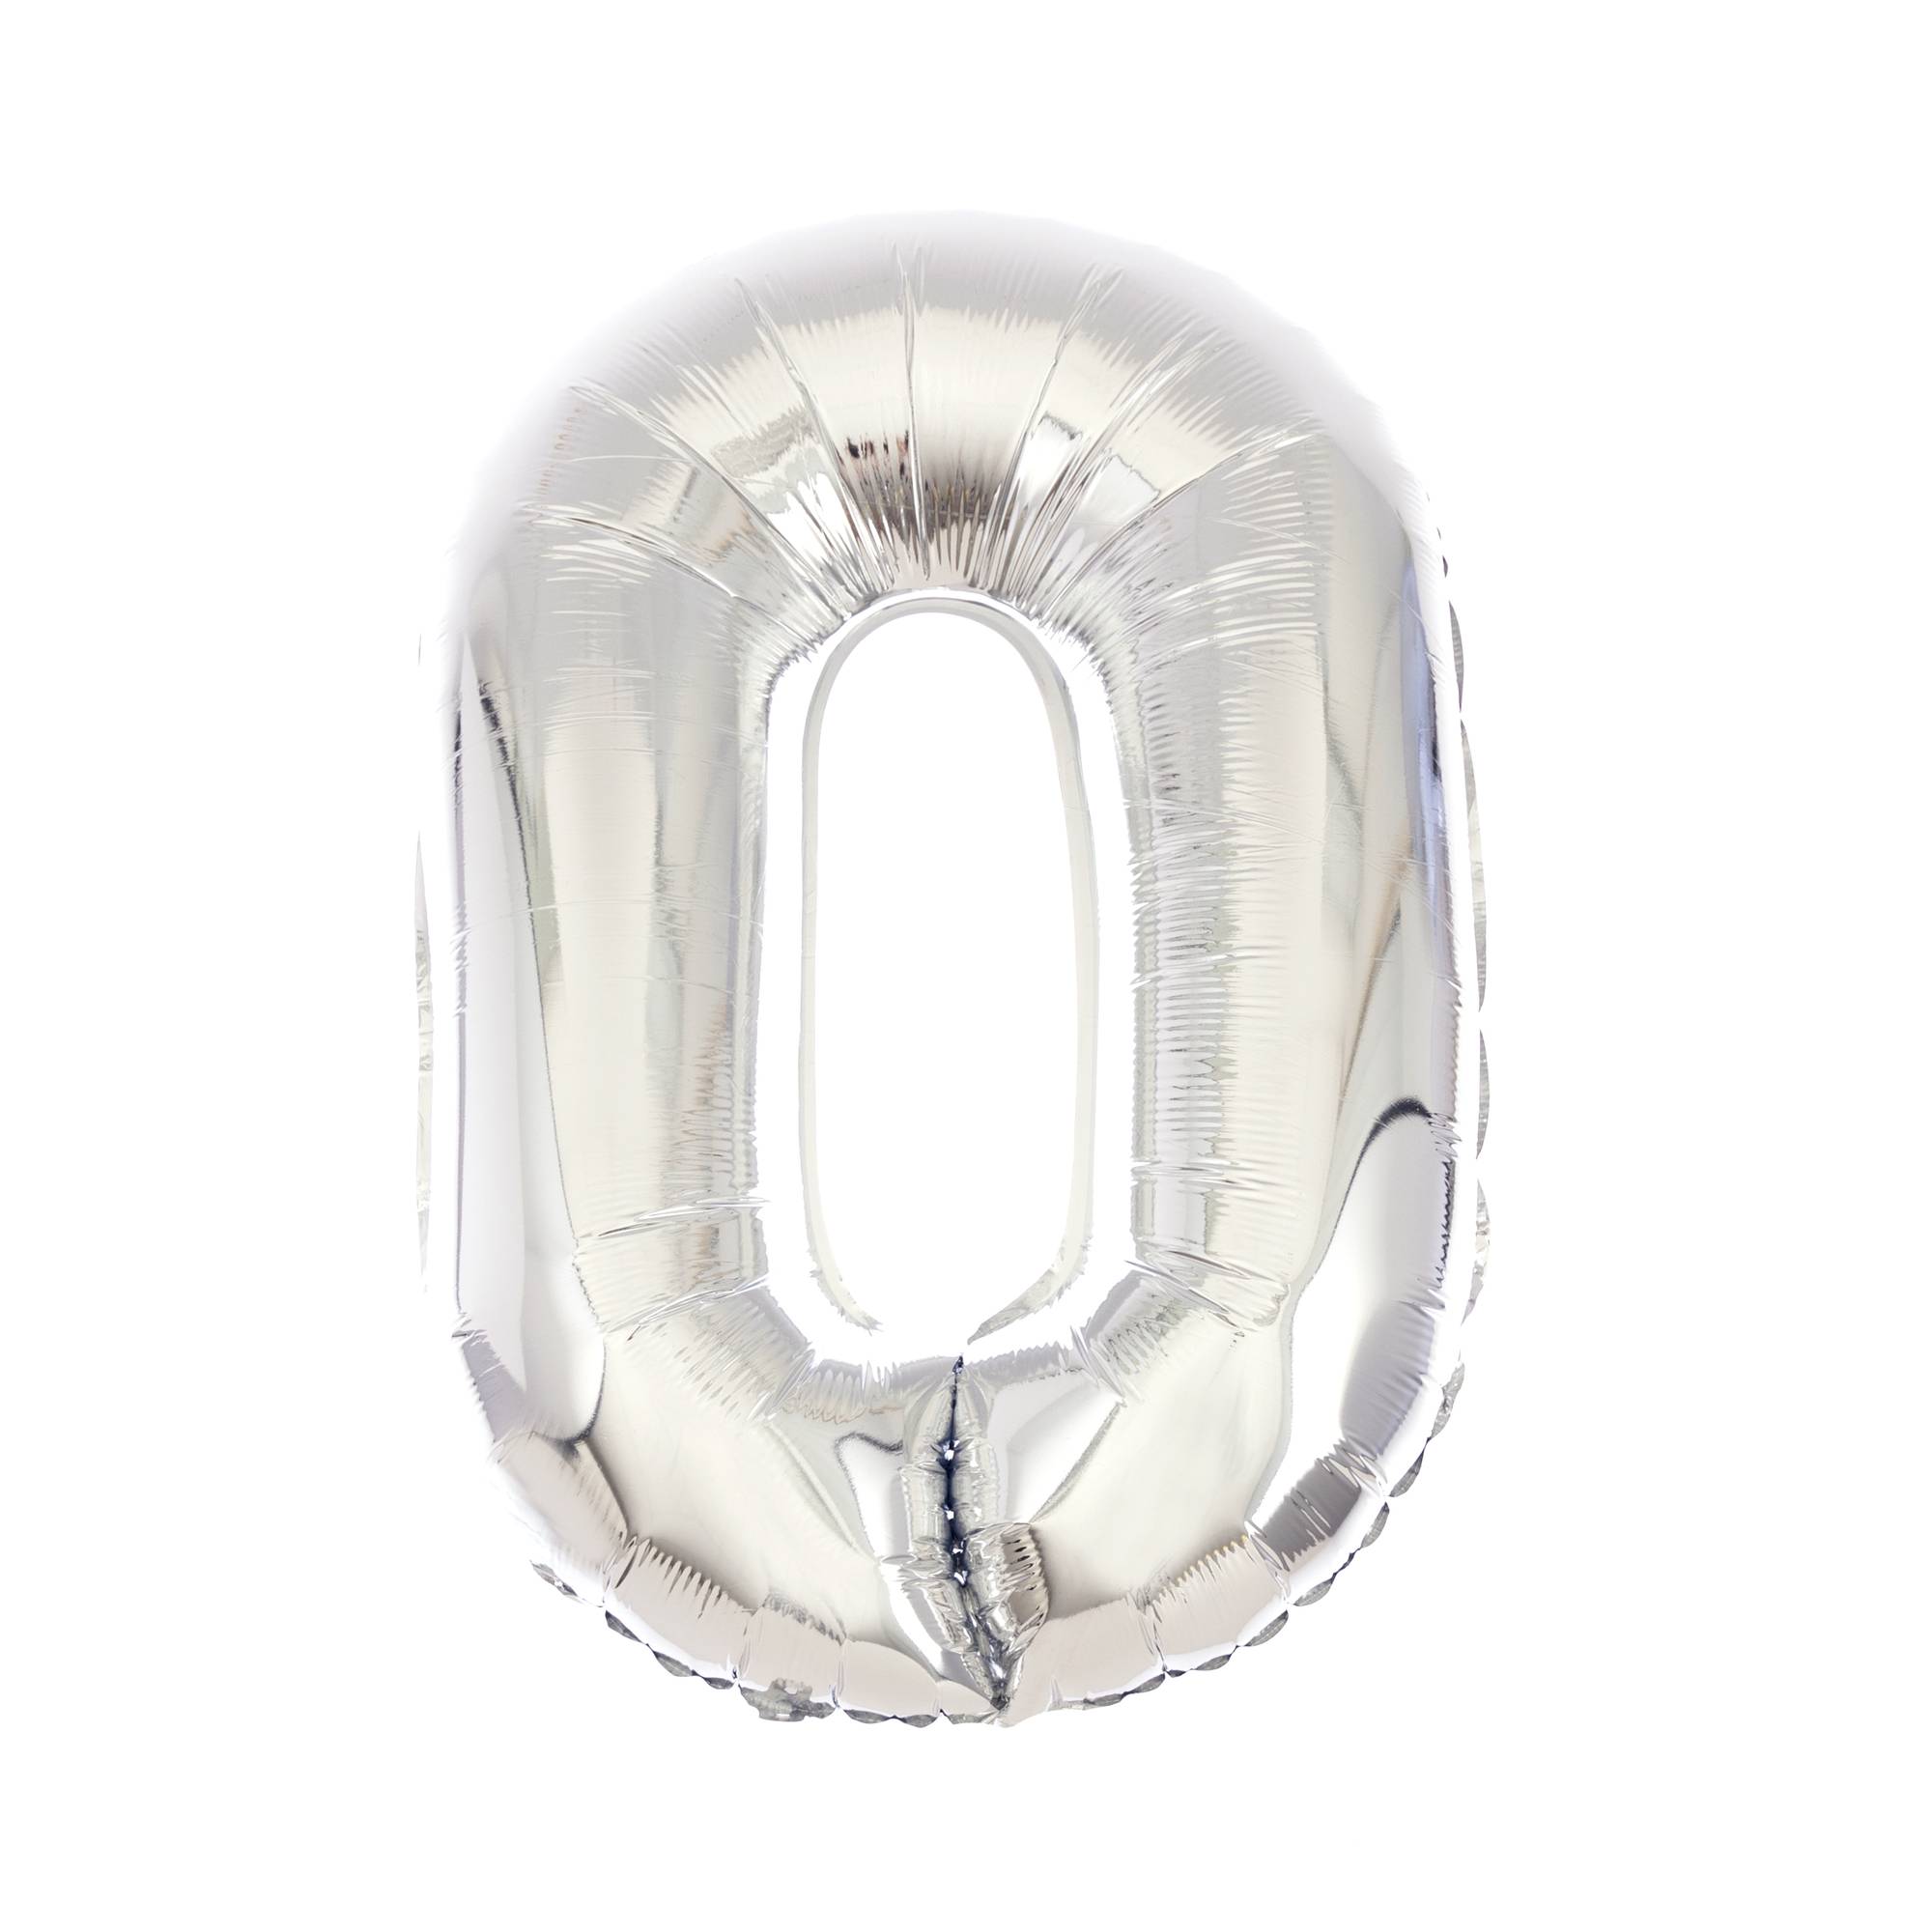 Extra Large Silver Foil Letter O Balloon